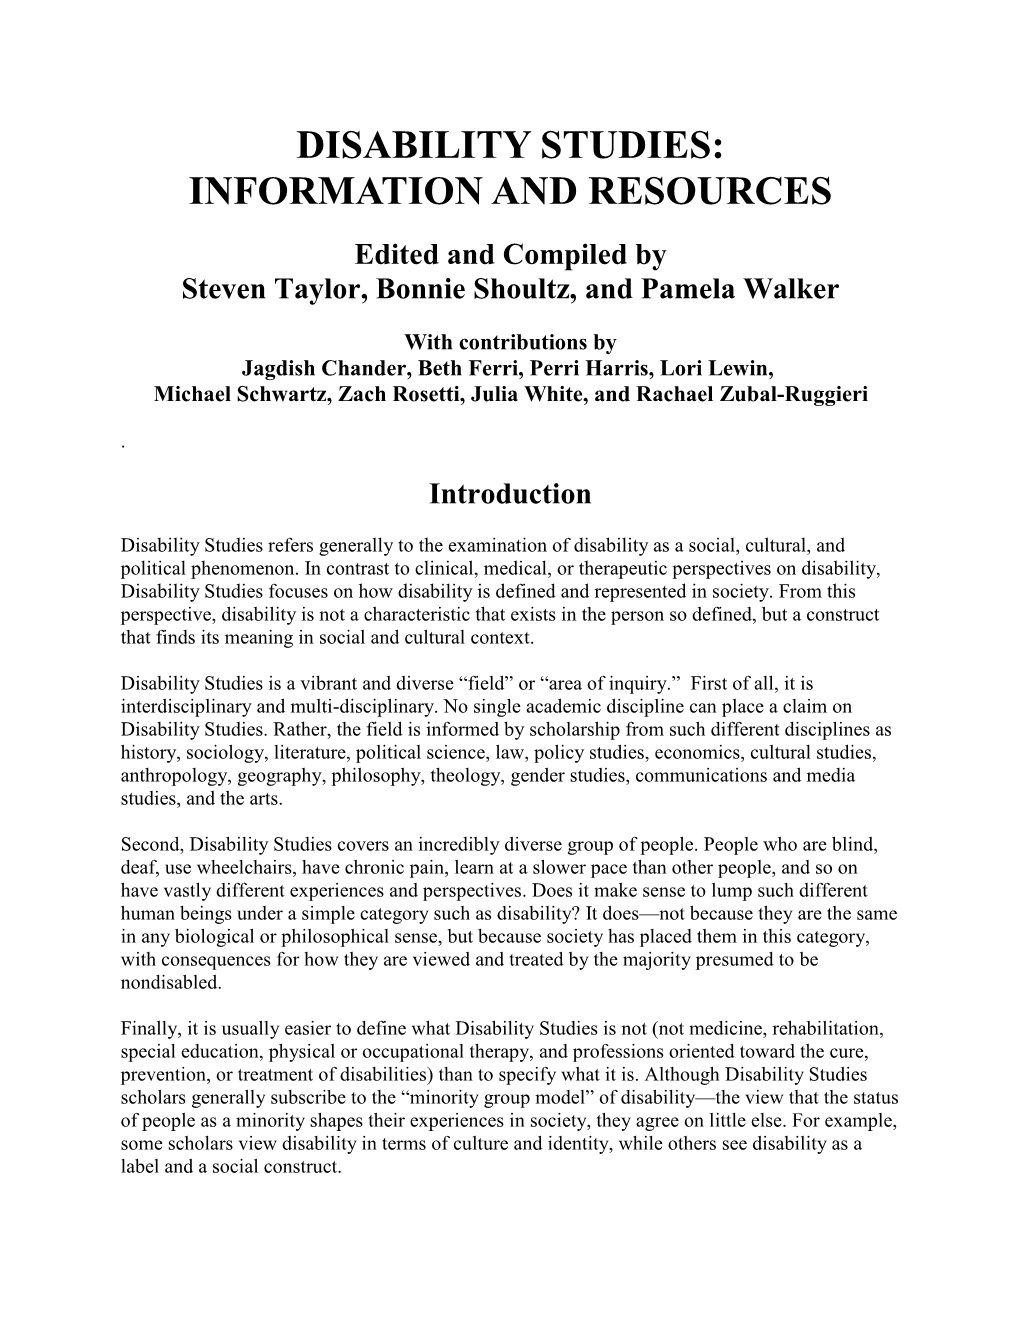 DISABILITY STUDIES: INFORMATION and RESOURCES Edited and Compiled by Steven Taylor, Bonnie Shoultz, and Pamela Walker